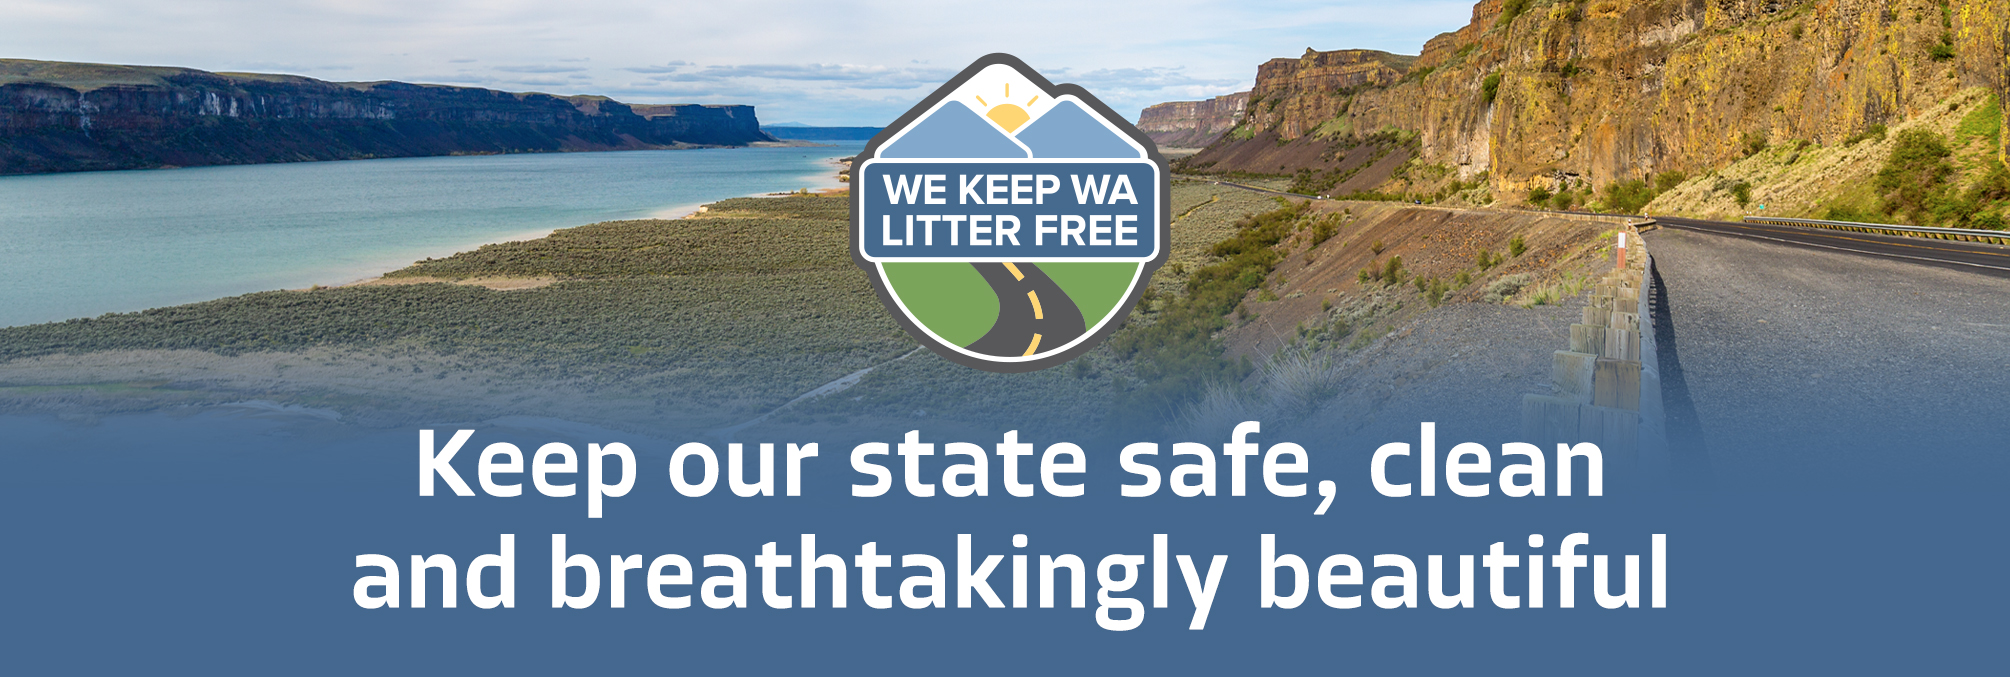 Keep our state safe, clean and breathtakingly beautiful.